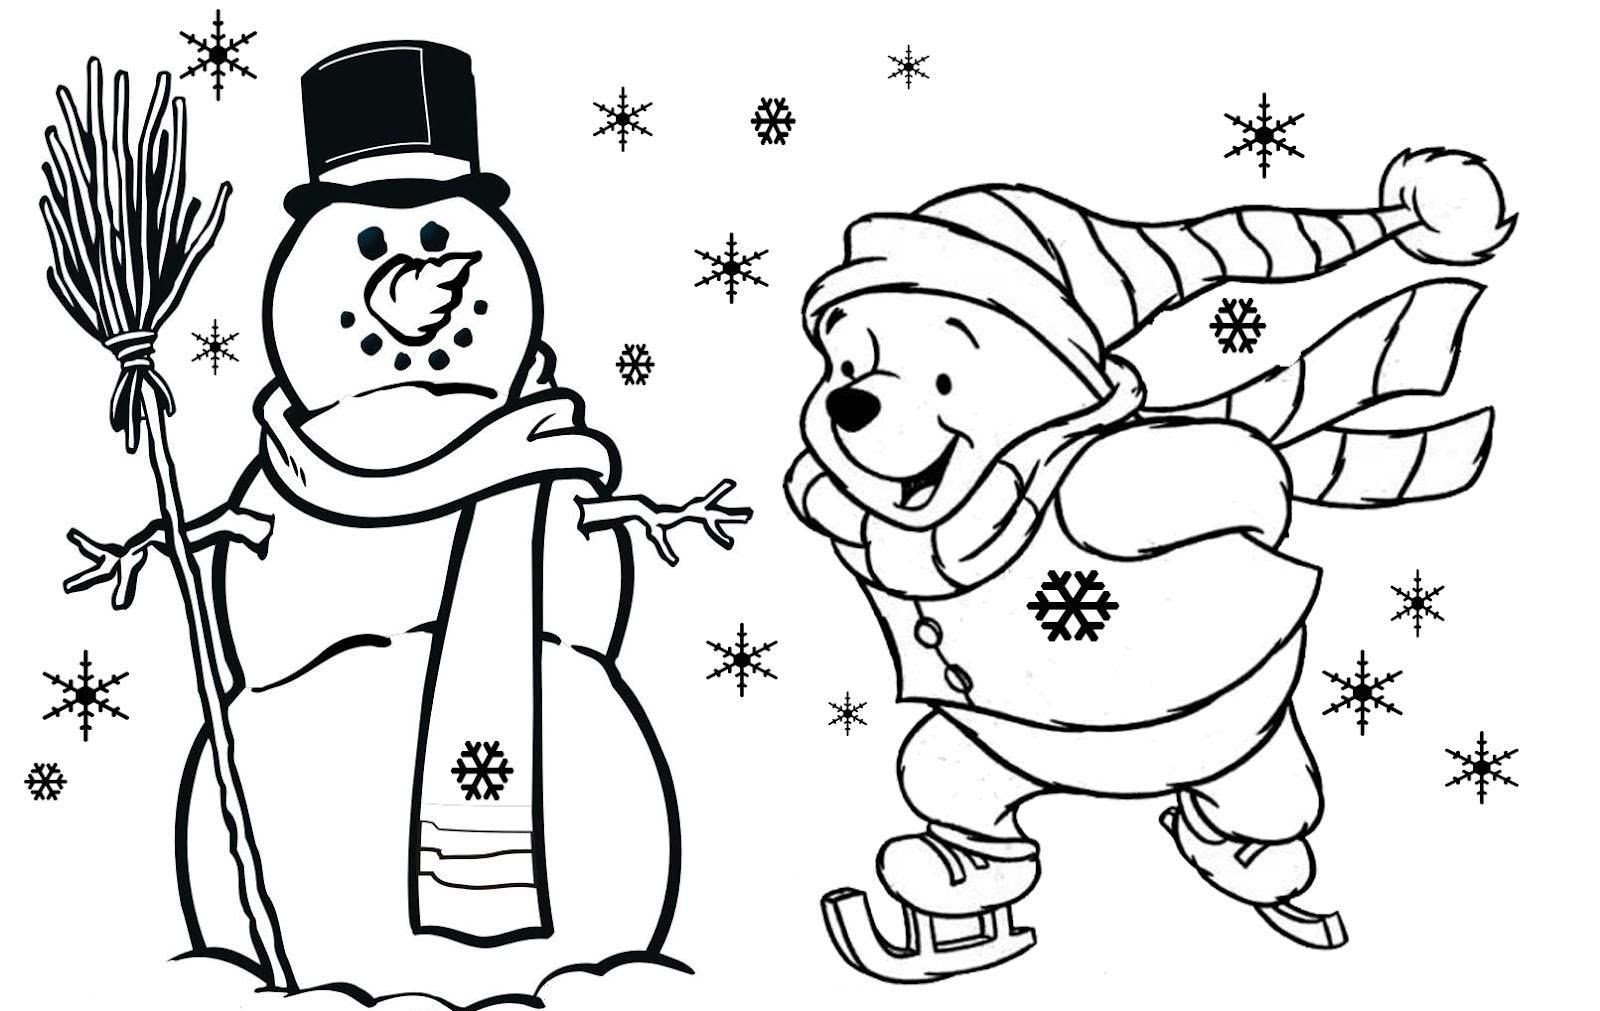 Free Disney Christmas Coloring Pages For Kids Printable Download Free Disney Christmas Coloring Pages For Kids Printable Png Images Free Cliparts On Clipart Library